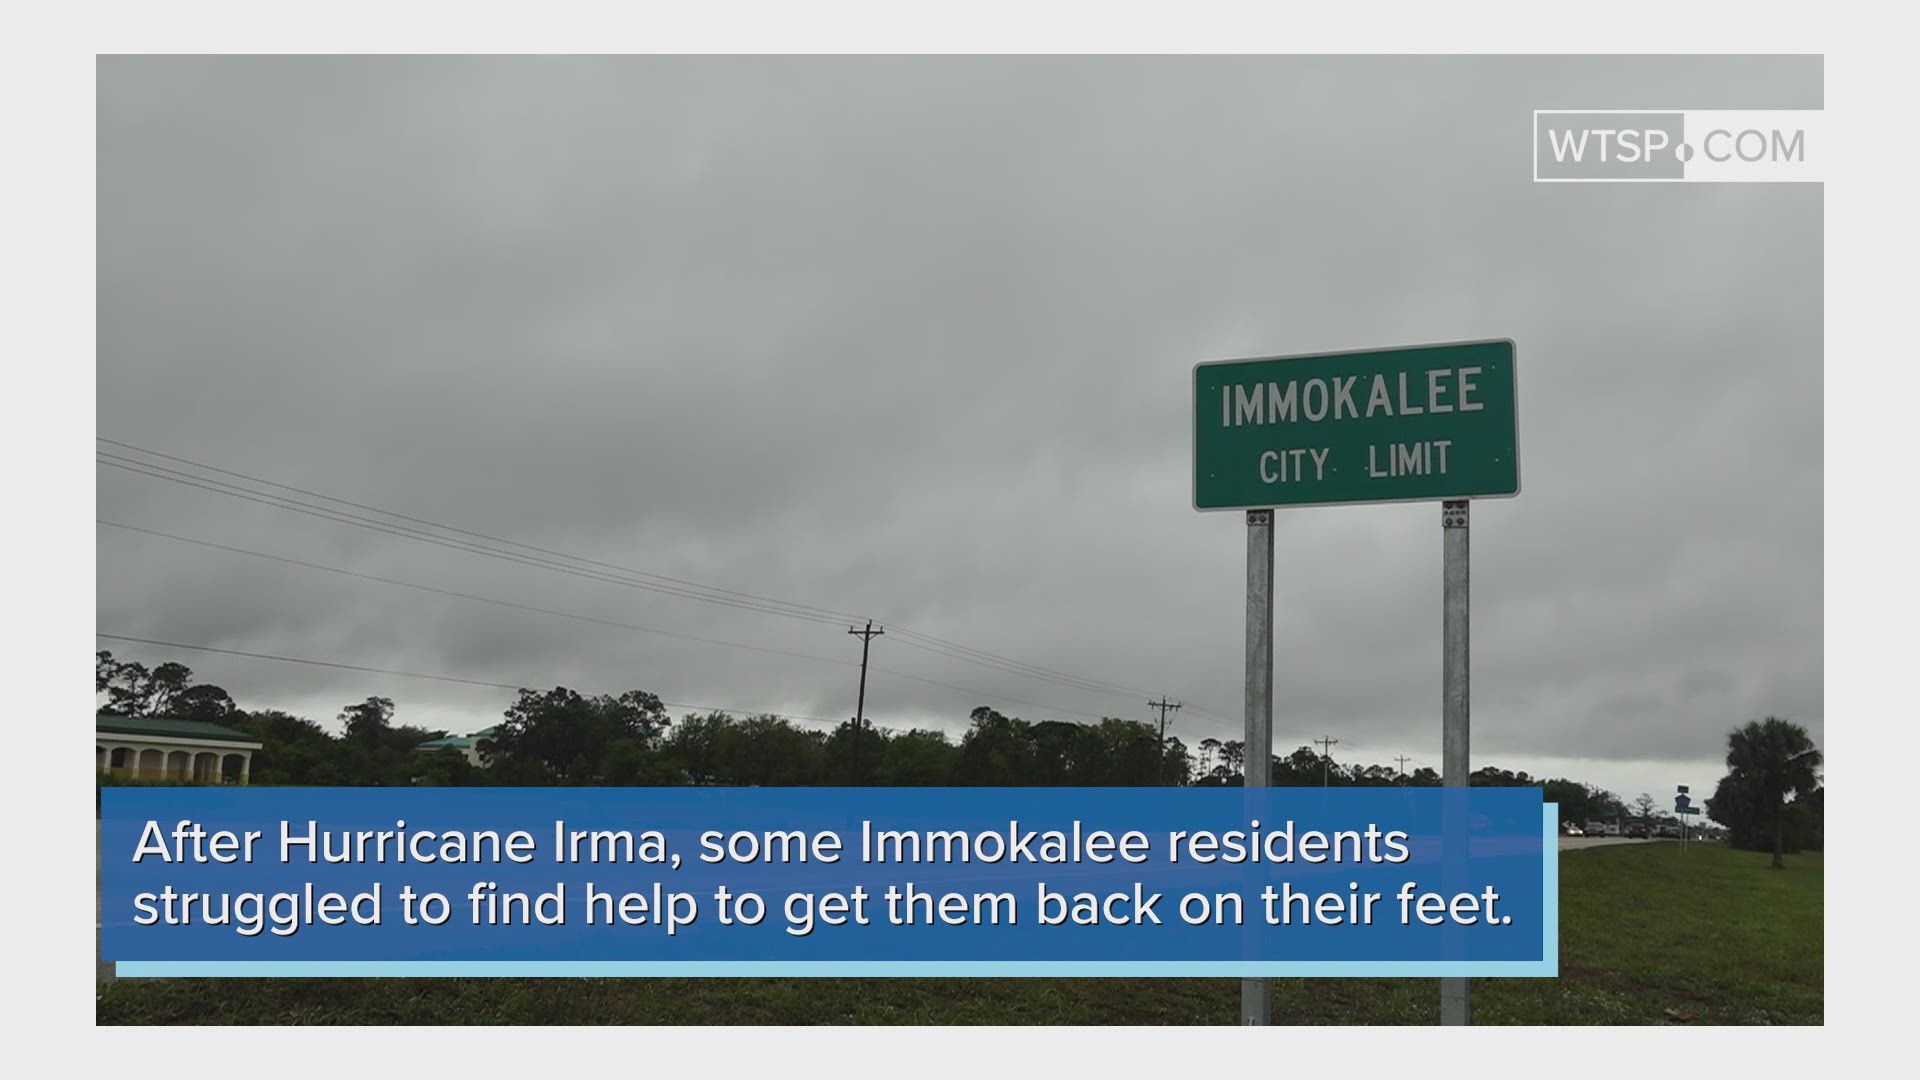 There's so much need in the town of Immokalee. After Hurricane Irma, Debbie realized just how much help the community really needed. FULL STORY: https://on.wtsp.com/2WCvPQU